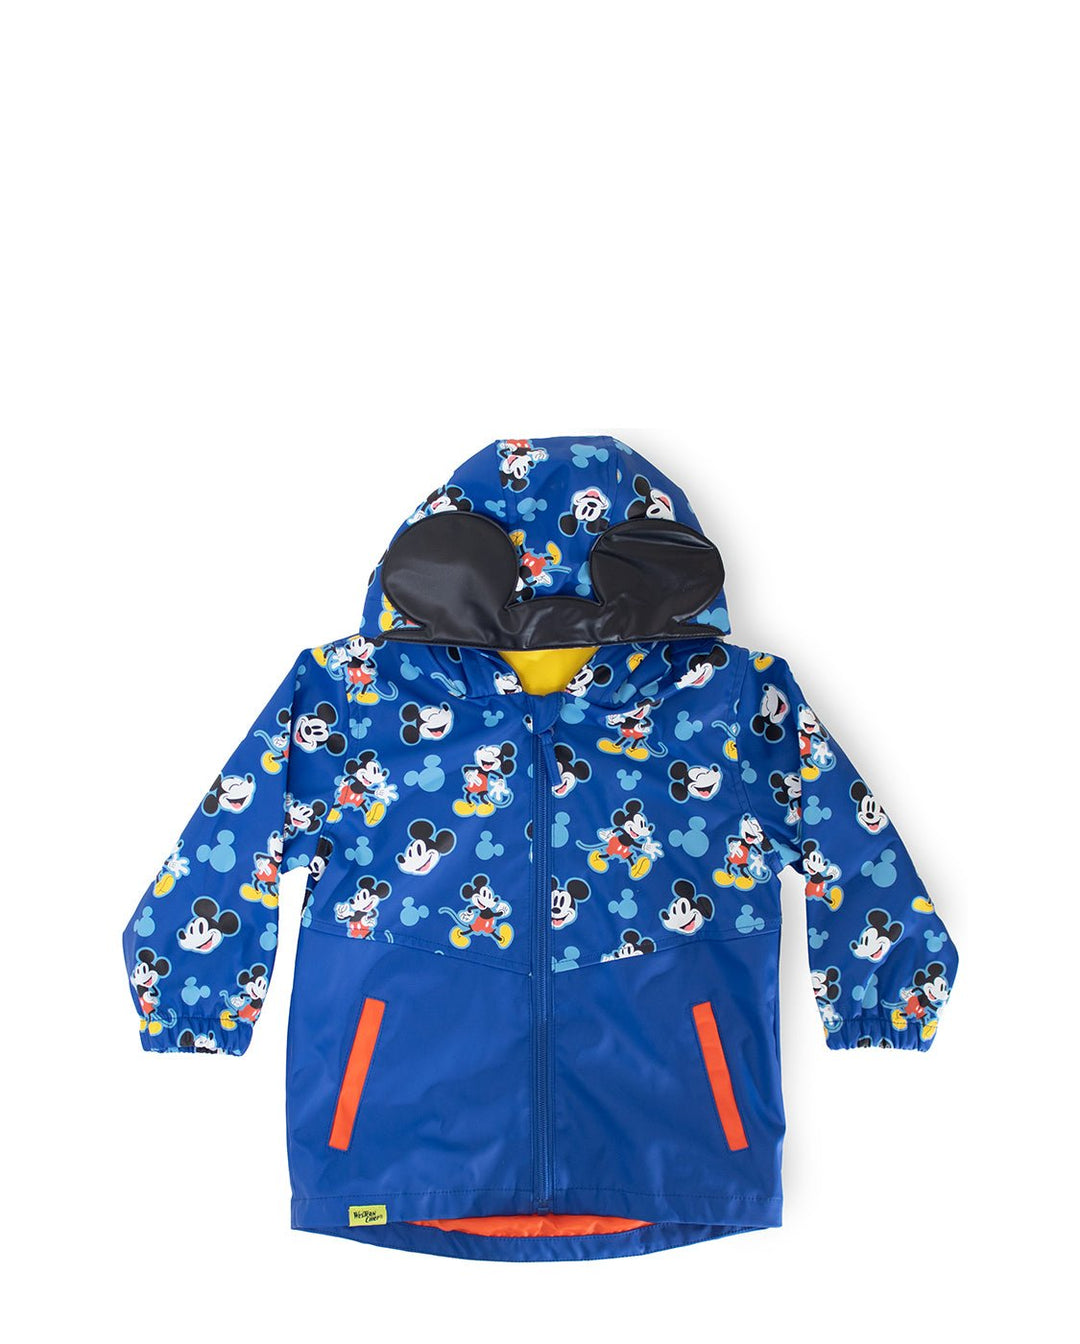 Kids Mickey Mouse Musketeer Raincoat - Blue - Western Chief